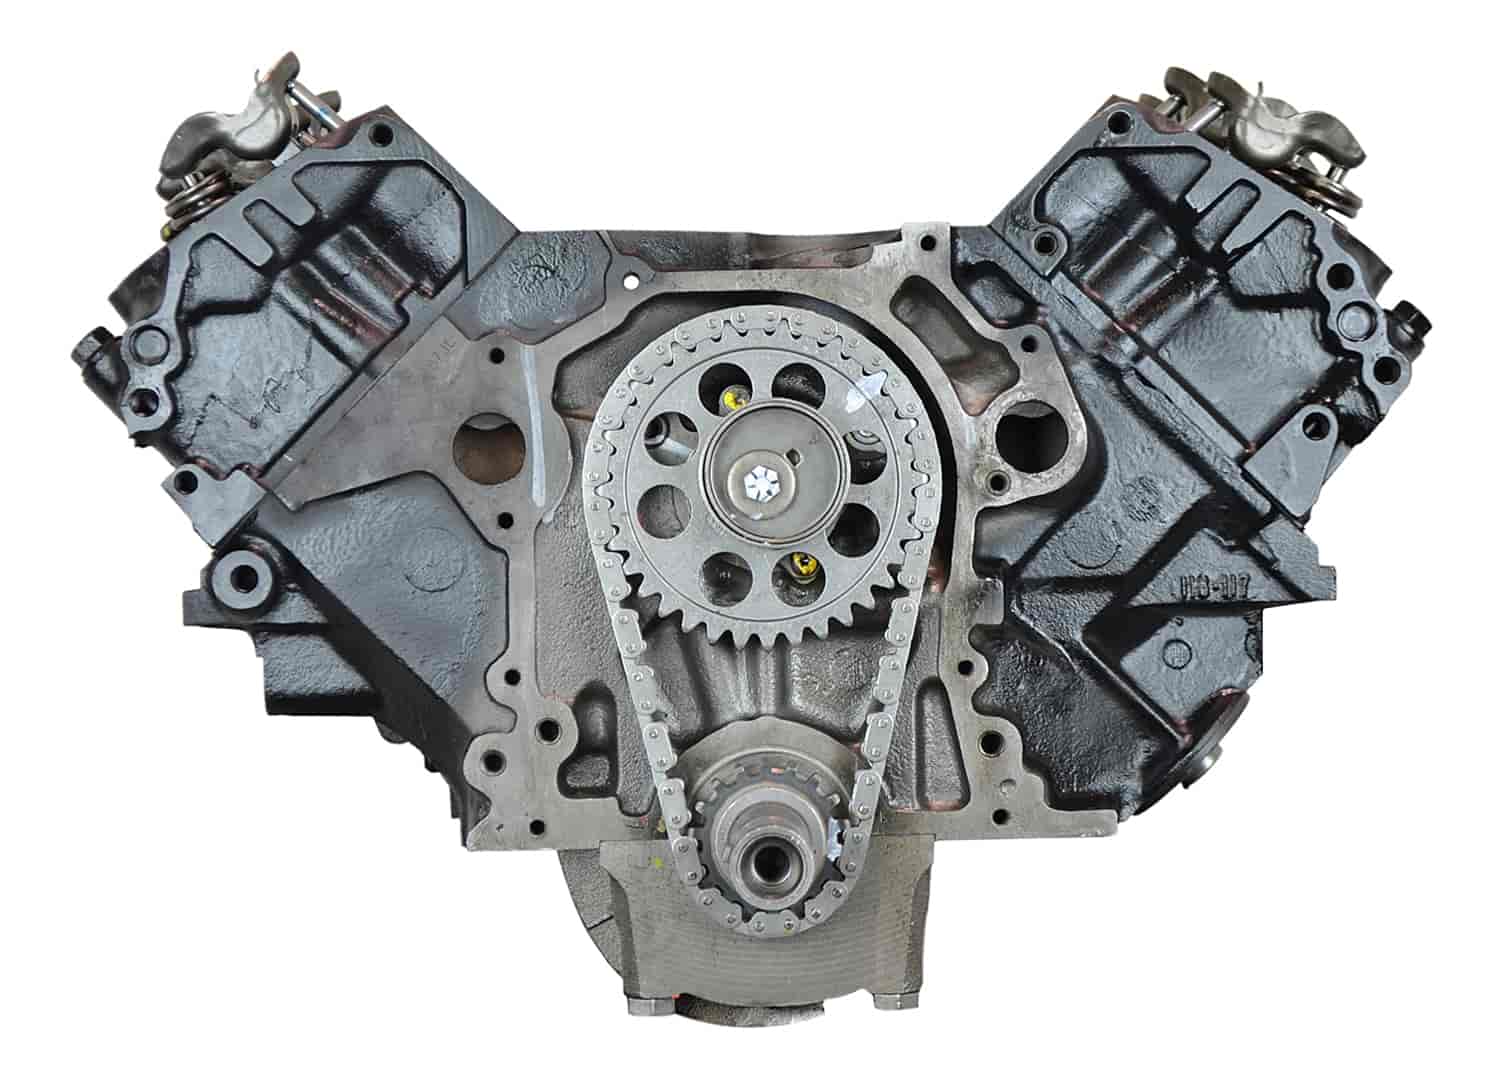 Remanufactured Crate Engine for 1985-1987 Ford Truck & Van with 460ci/7.5L V8